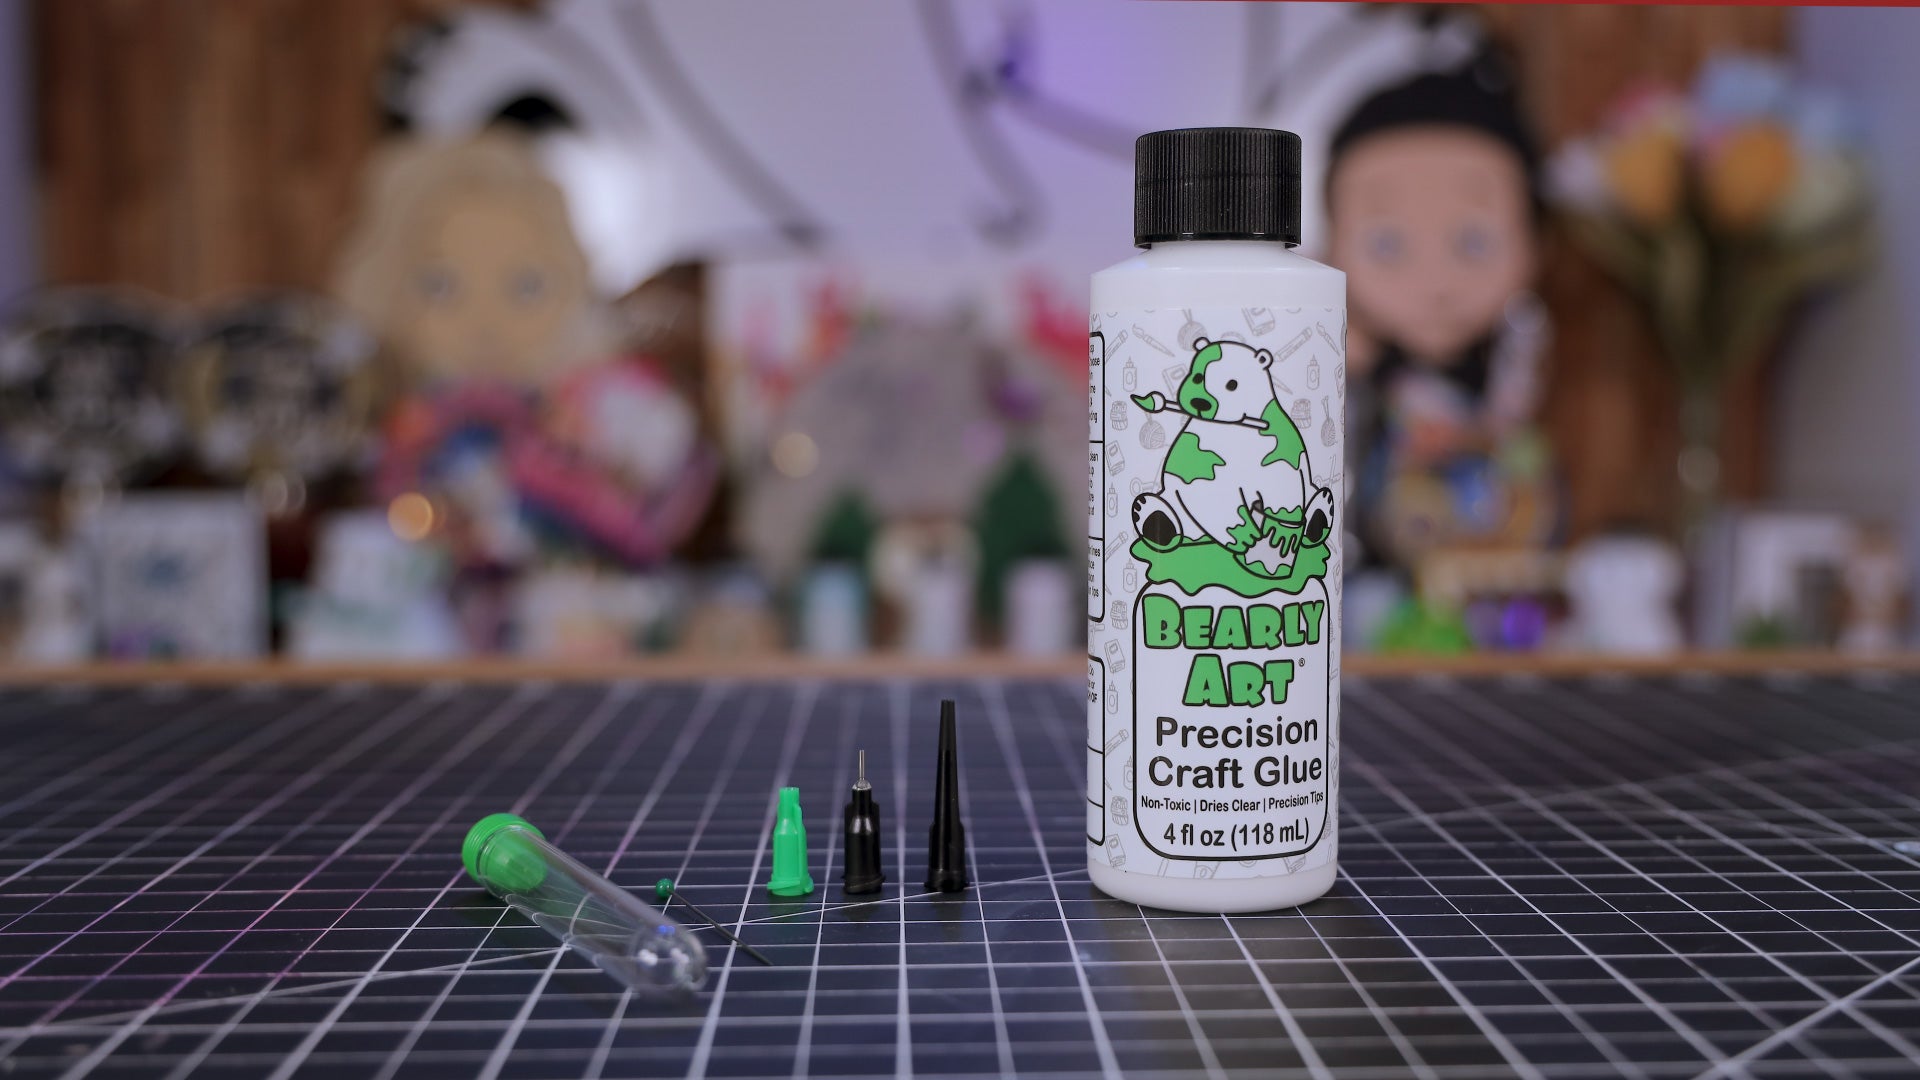 Unboxing Bearly Art Glue Check This Out Y'all!